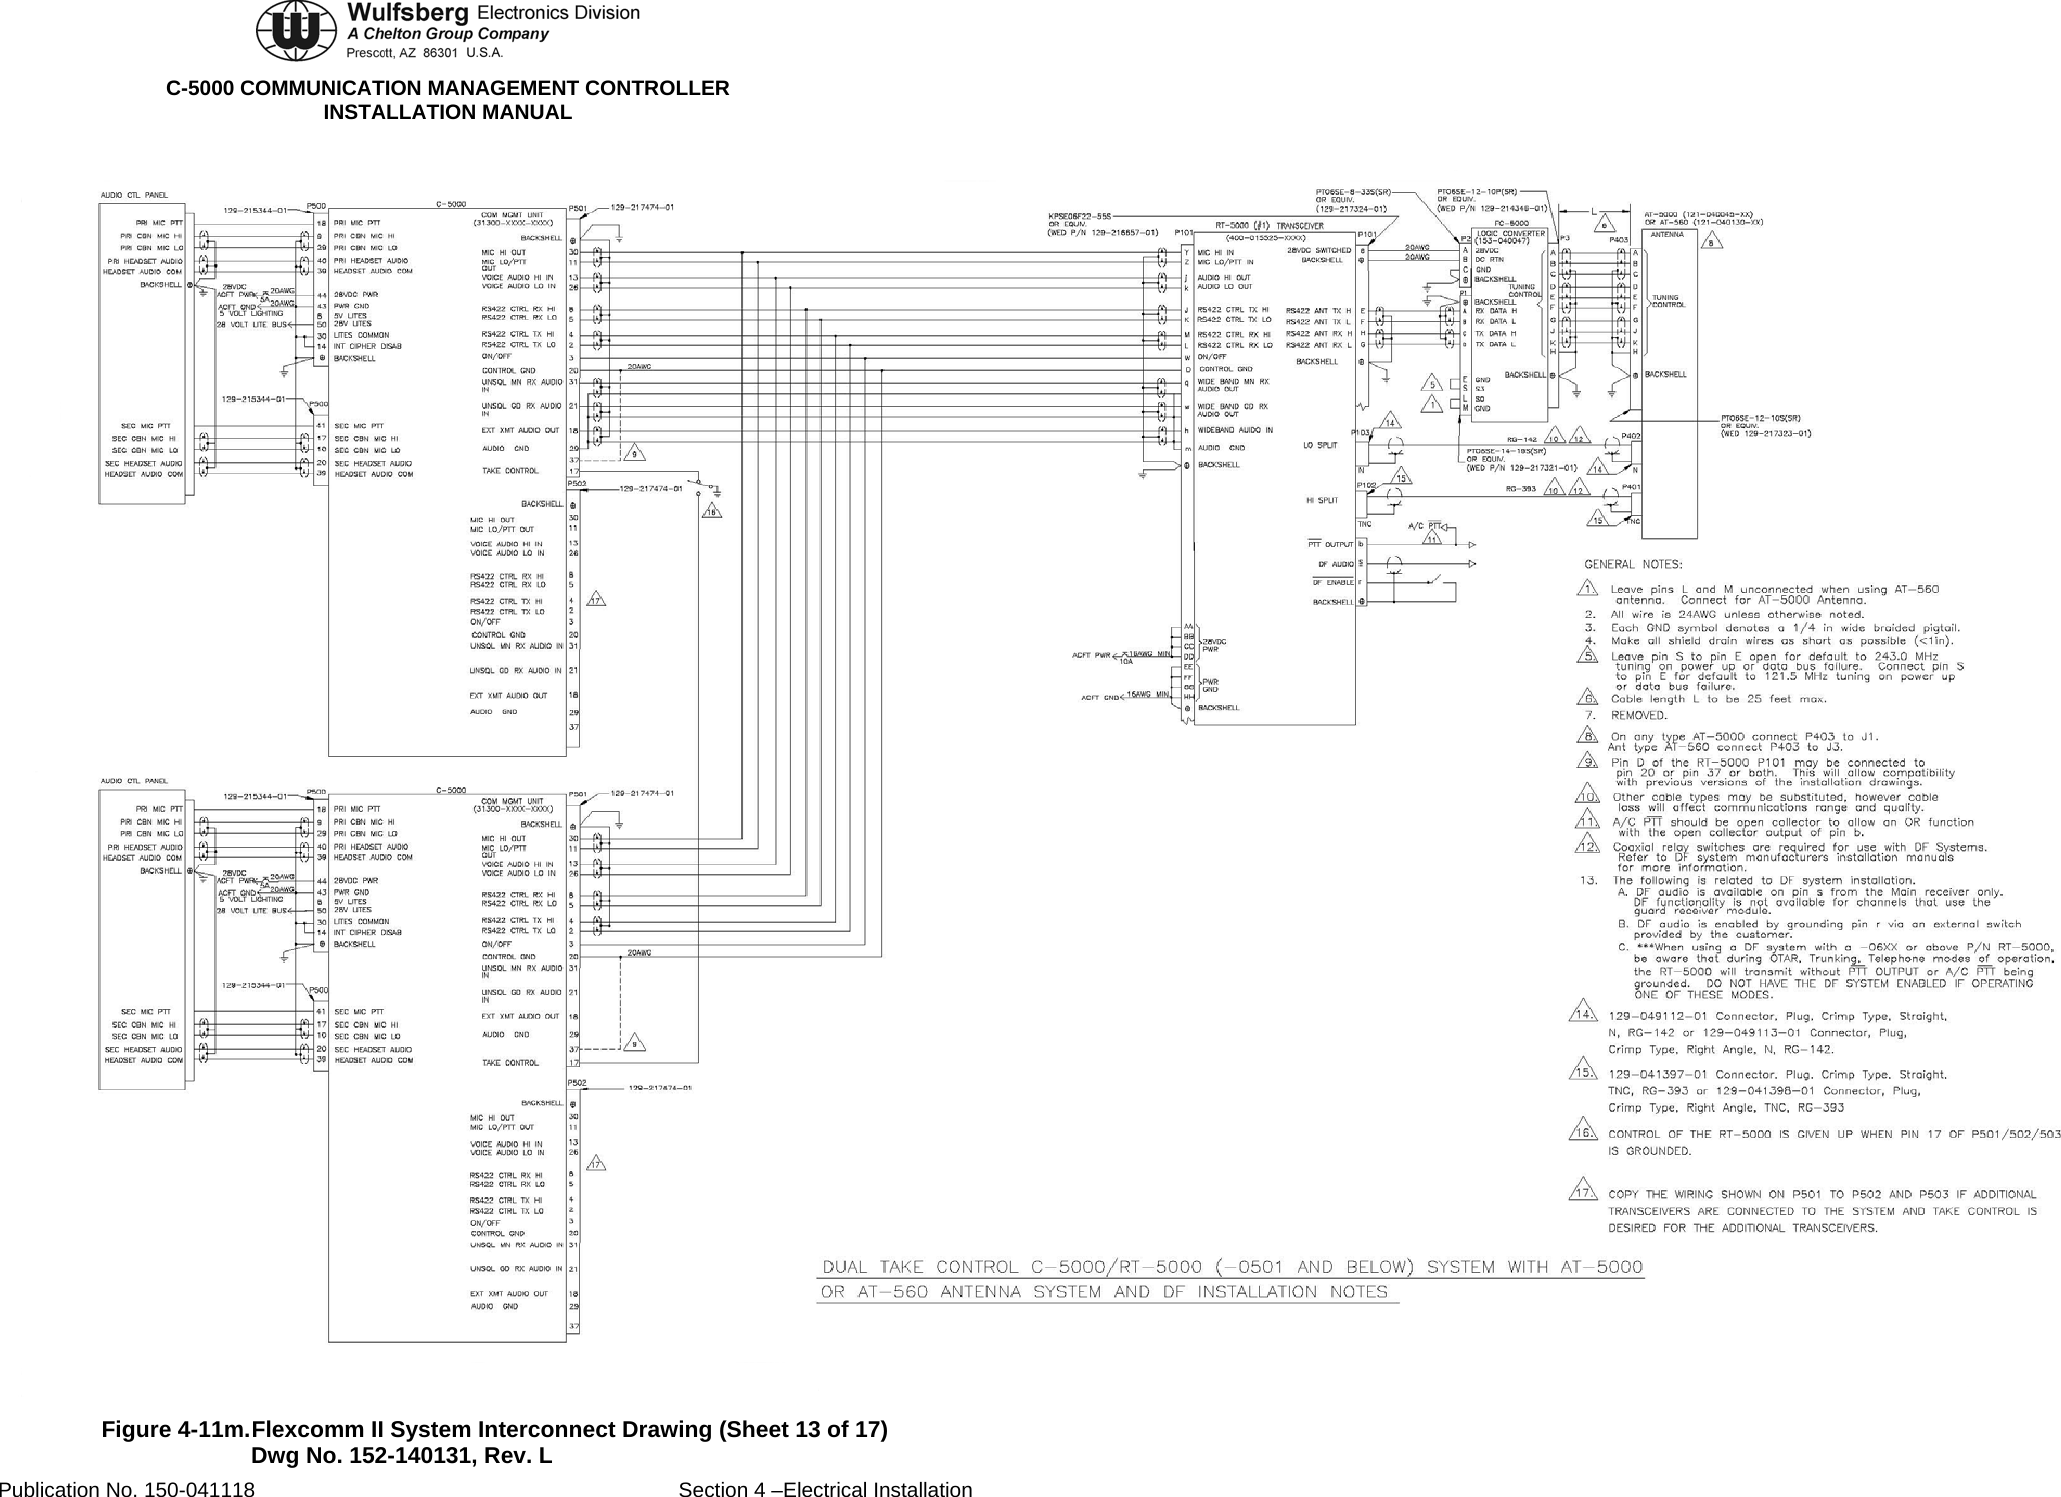  C-5000 COMMUNICATION MANAGEMENT CONTROLLER INSTALLATION MANUAL  Figure 4-11m. Flexcomm II System Interconnect Drawing (Sheet 13 of 17) Dwg No. 152-140131, Rev. L Publication No. 150-041118  Section 4 –Electrical Installation 